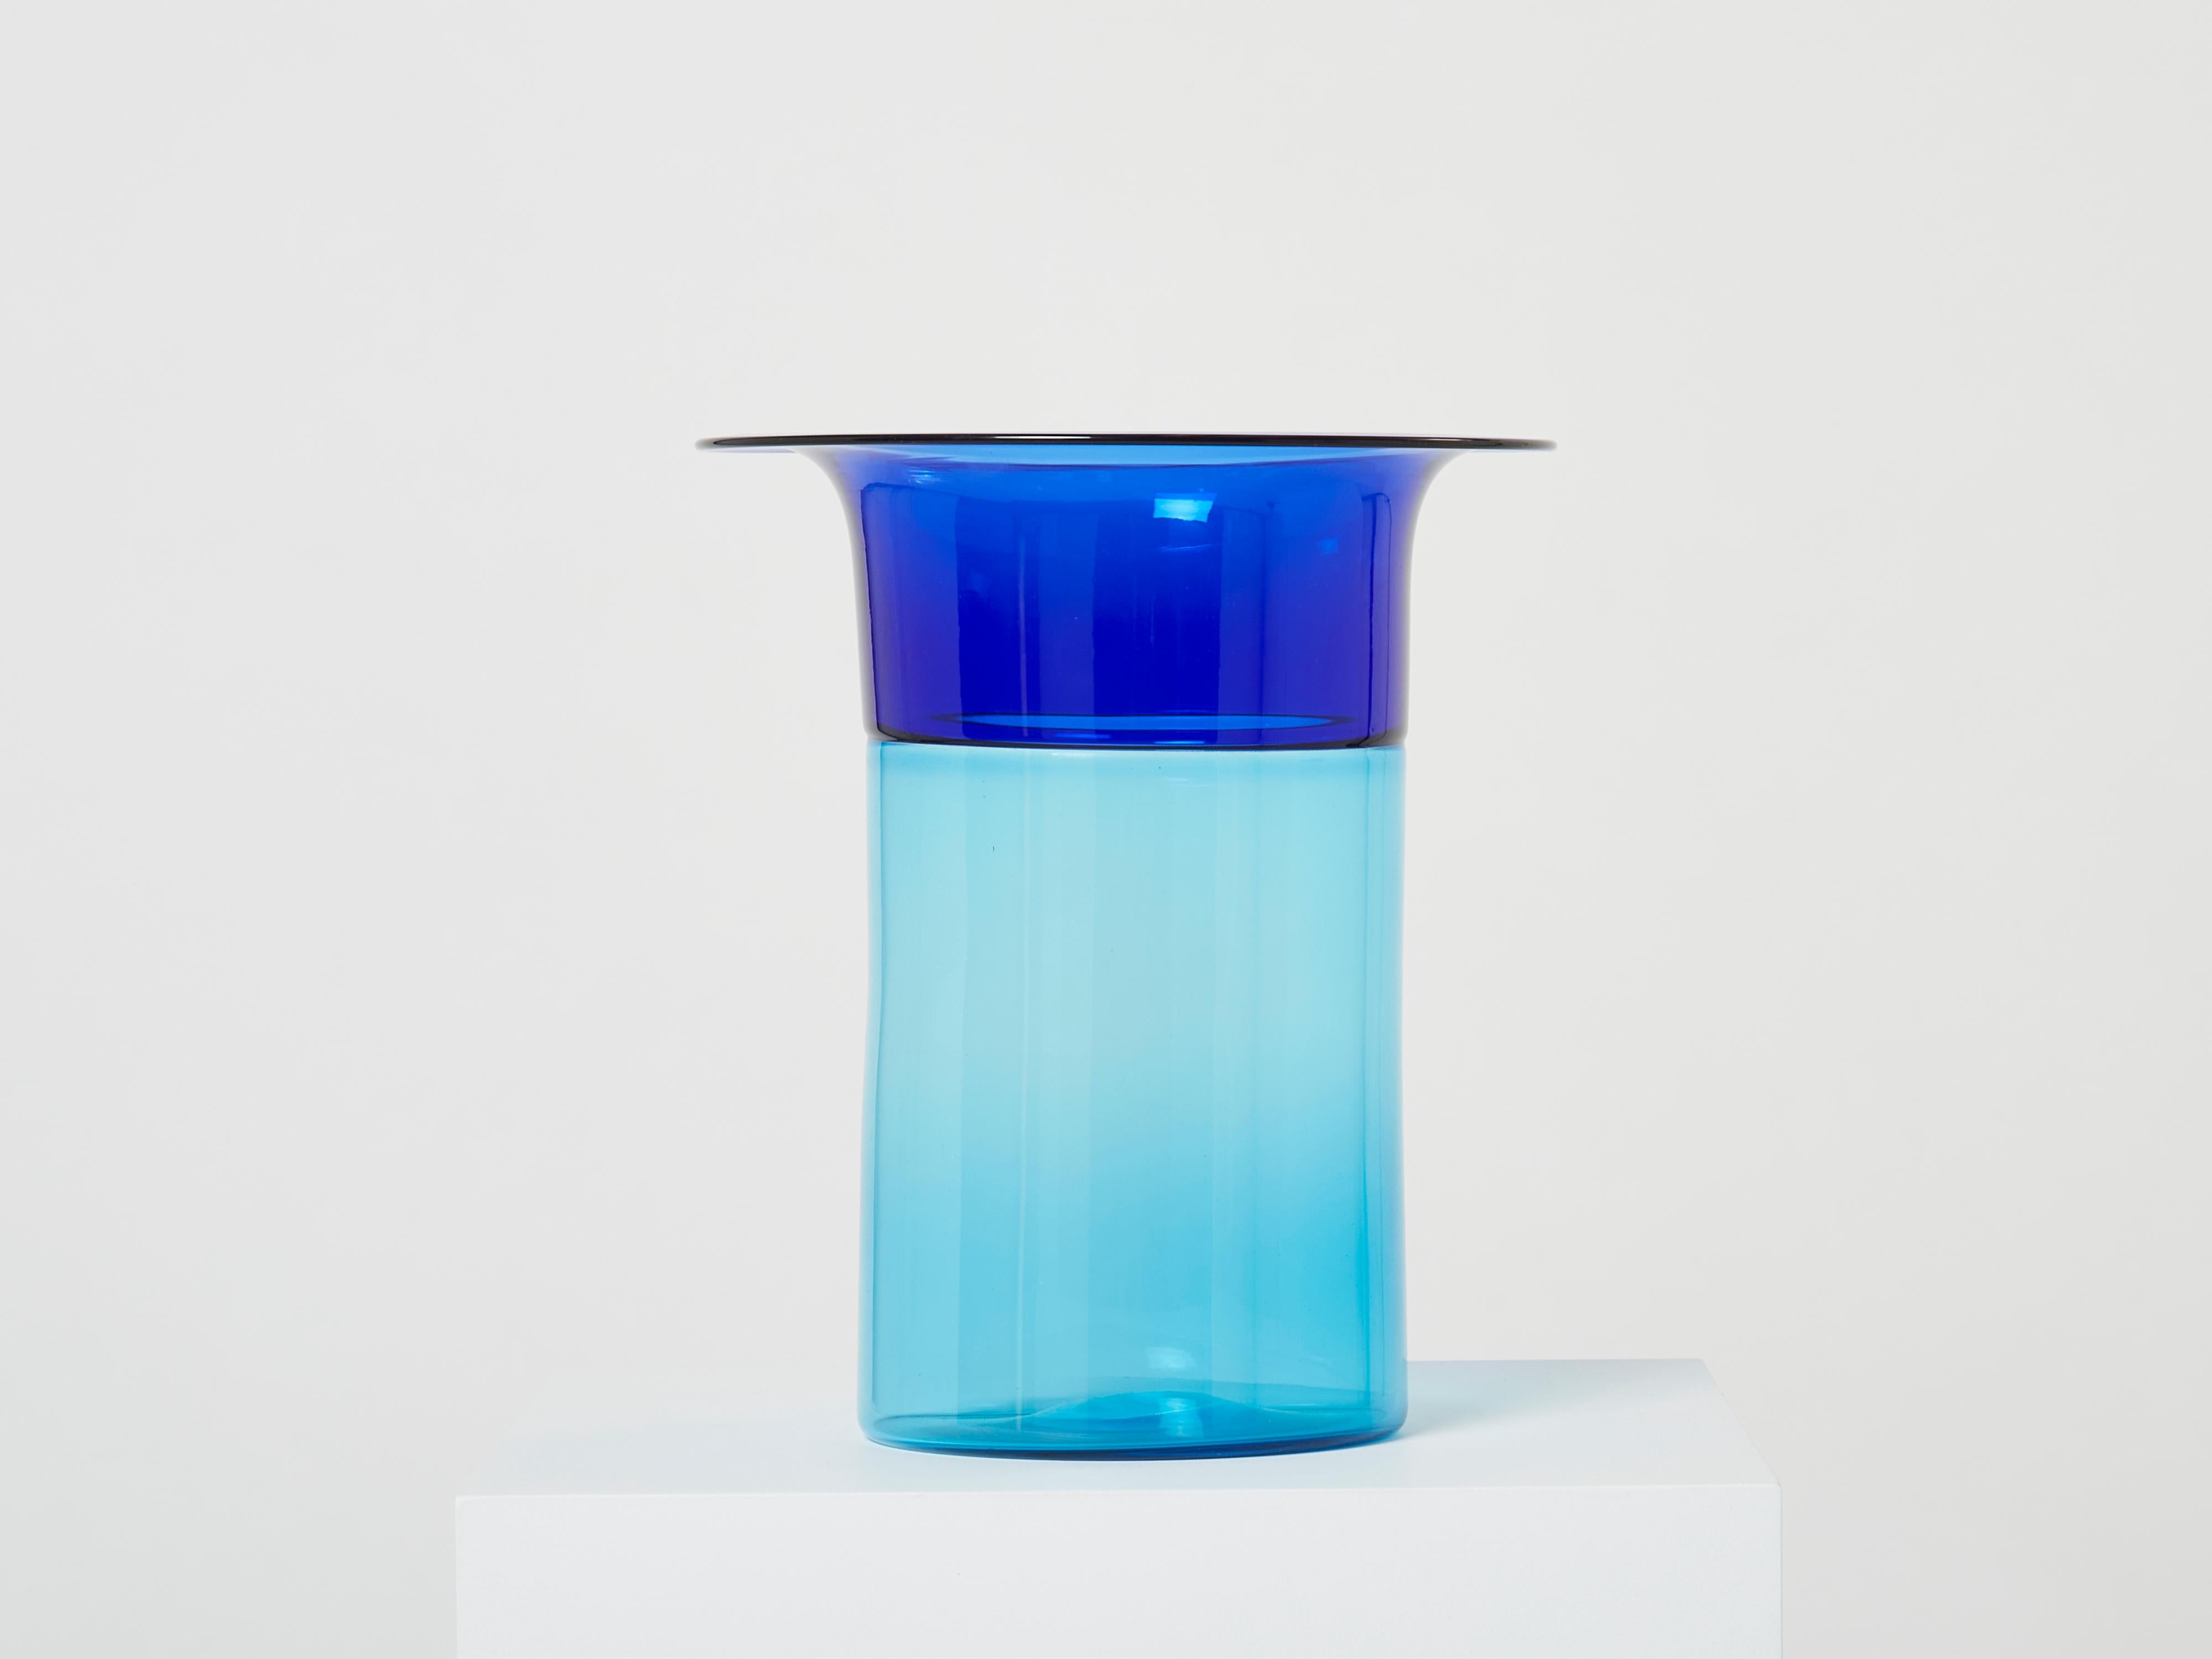 Beautiful Luciano Gaspari vase for Salviati Murano made in the 1970s from the Incalmo series. This vase has eye-catching colors, with royal blue submerged into aquamarine blue. It is quite large and tall, cylindrical shaped with a widened rim, and